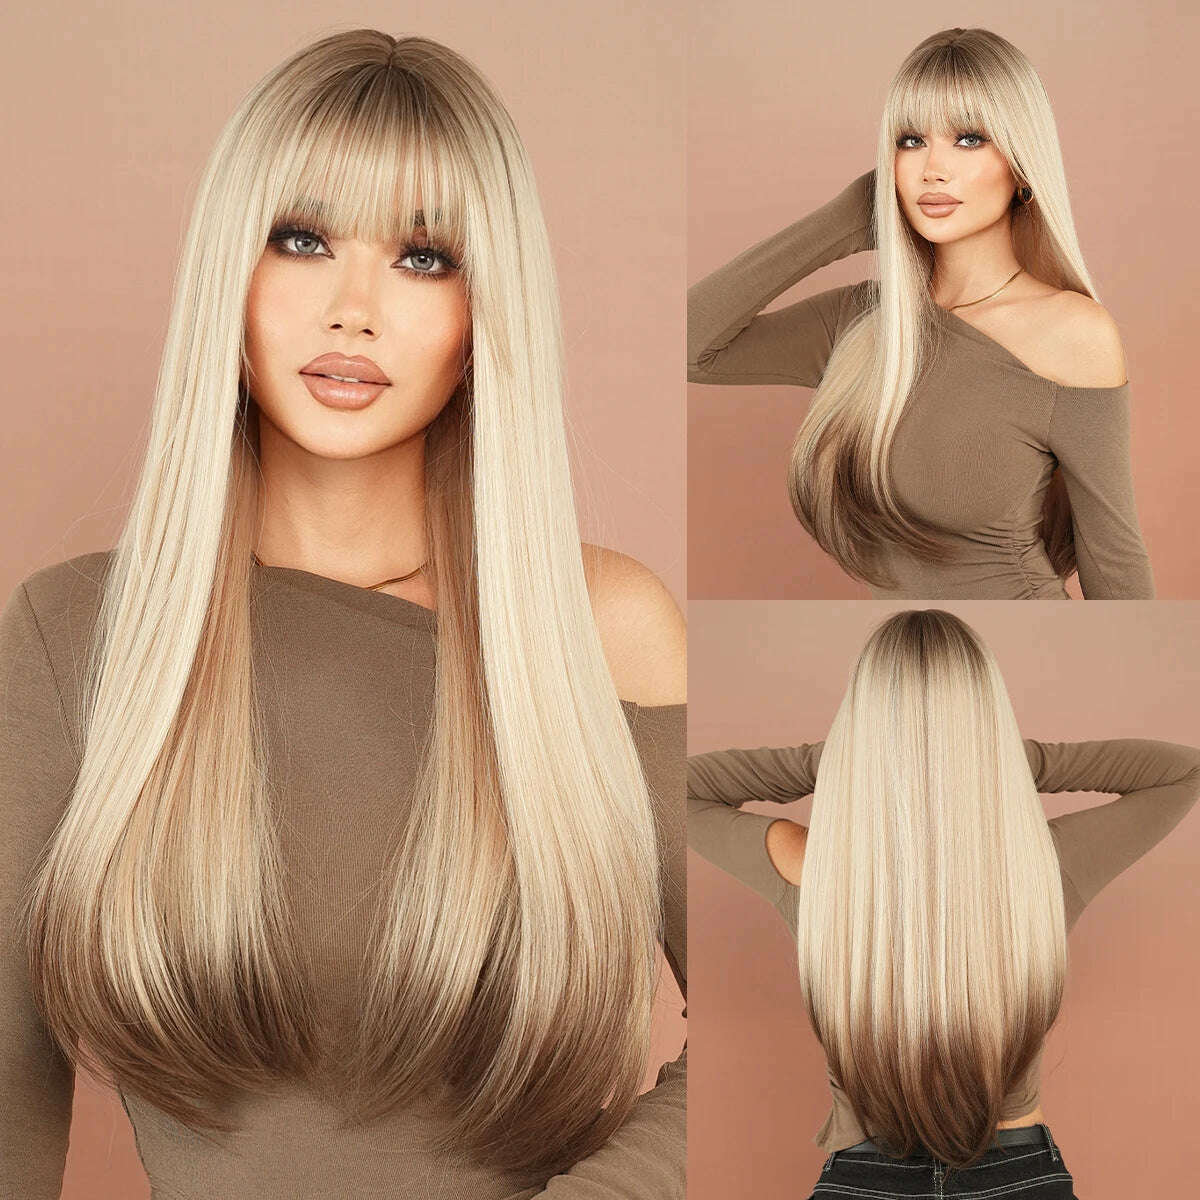 KIMLUD, NAMM Long Body Straight Silver Ash Hair Wig With Bangs For Women Daily Party High Density Hair Ombre Wigs Heat Resistant Fiber, MW9132-4, KIMLUD Womens Clothes